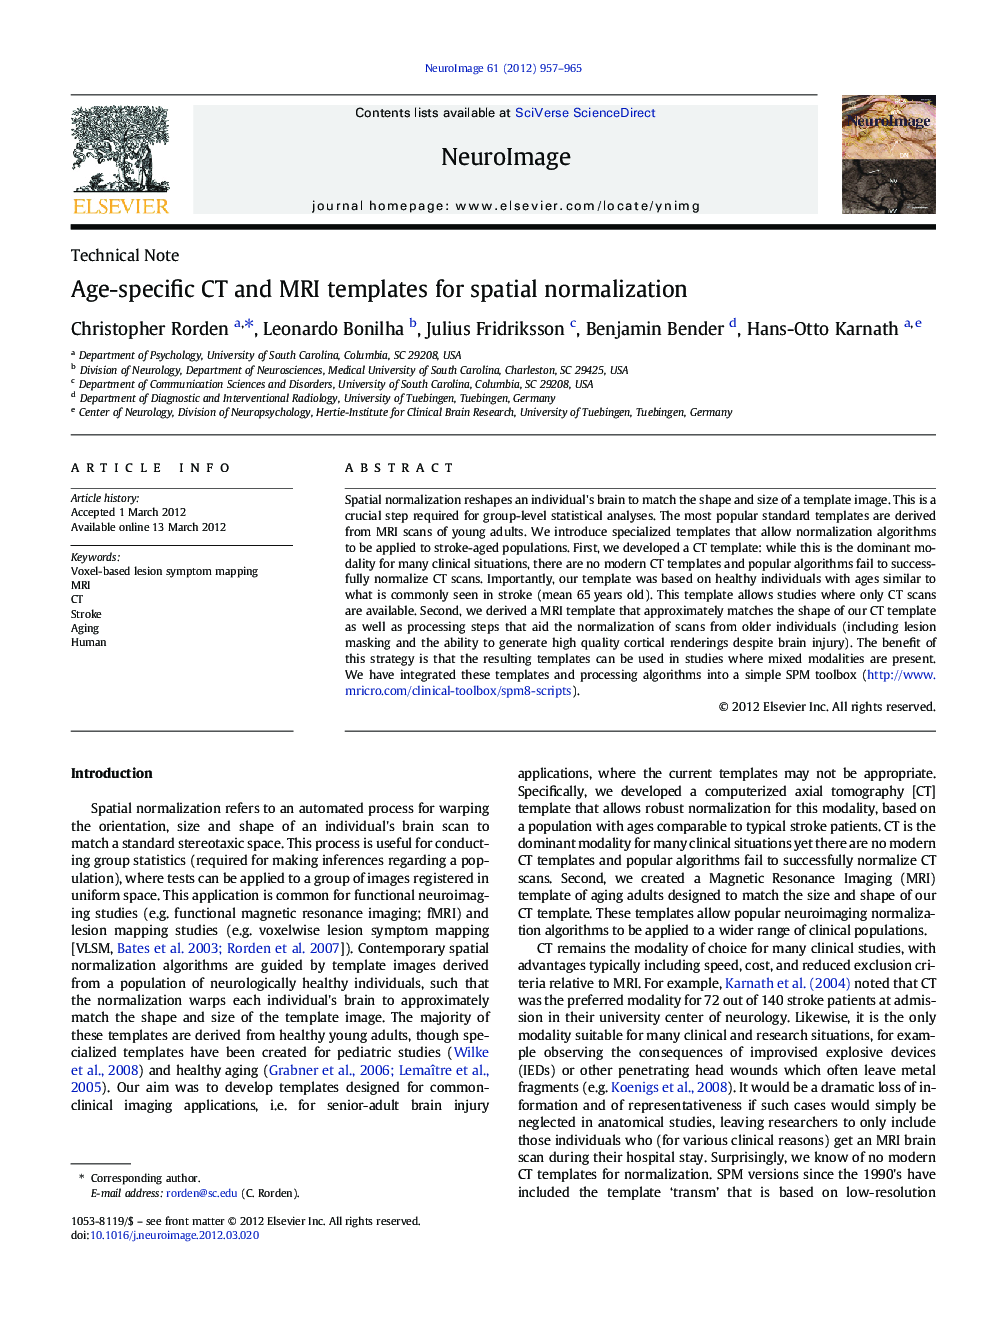 Age-specific CT and MRI templates for spatial normalization